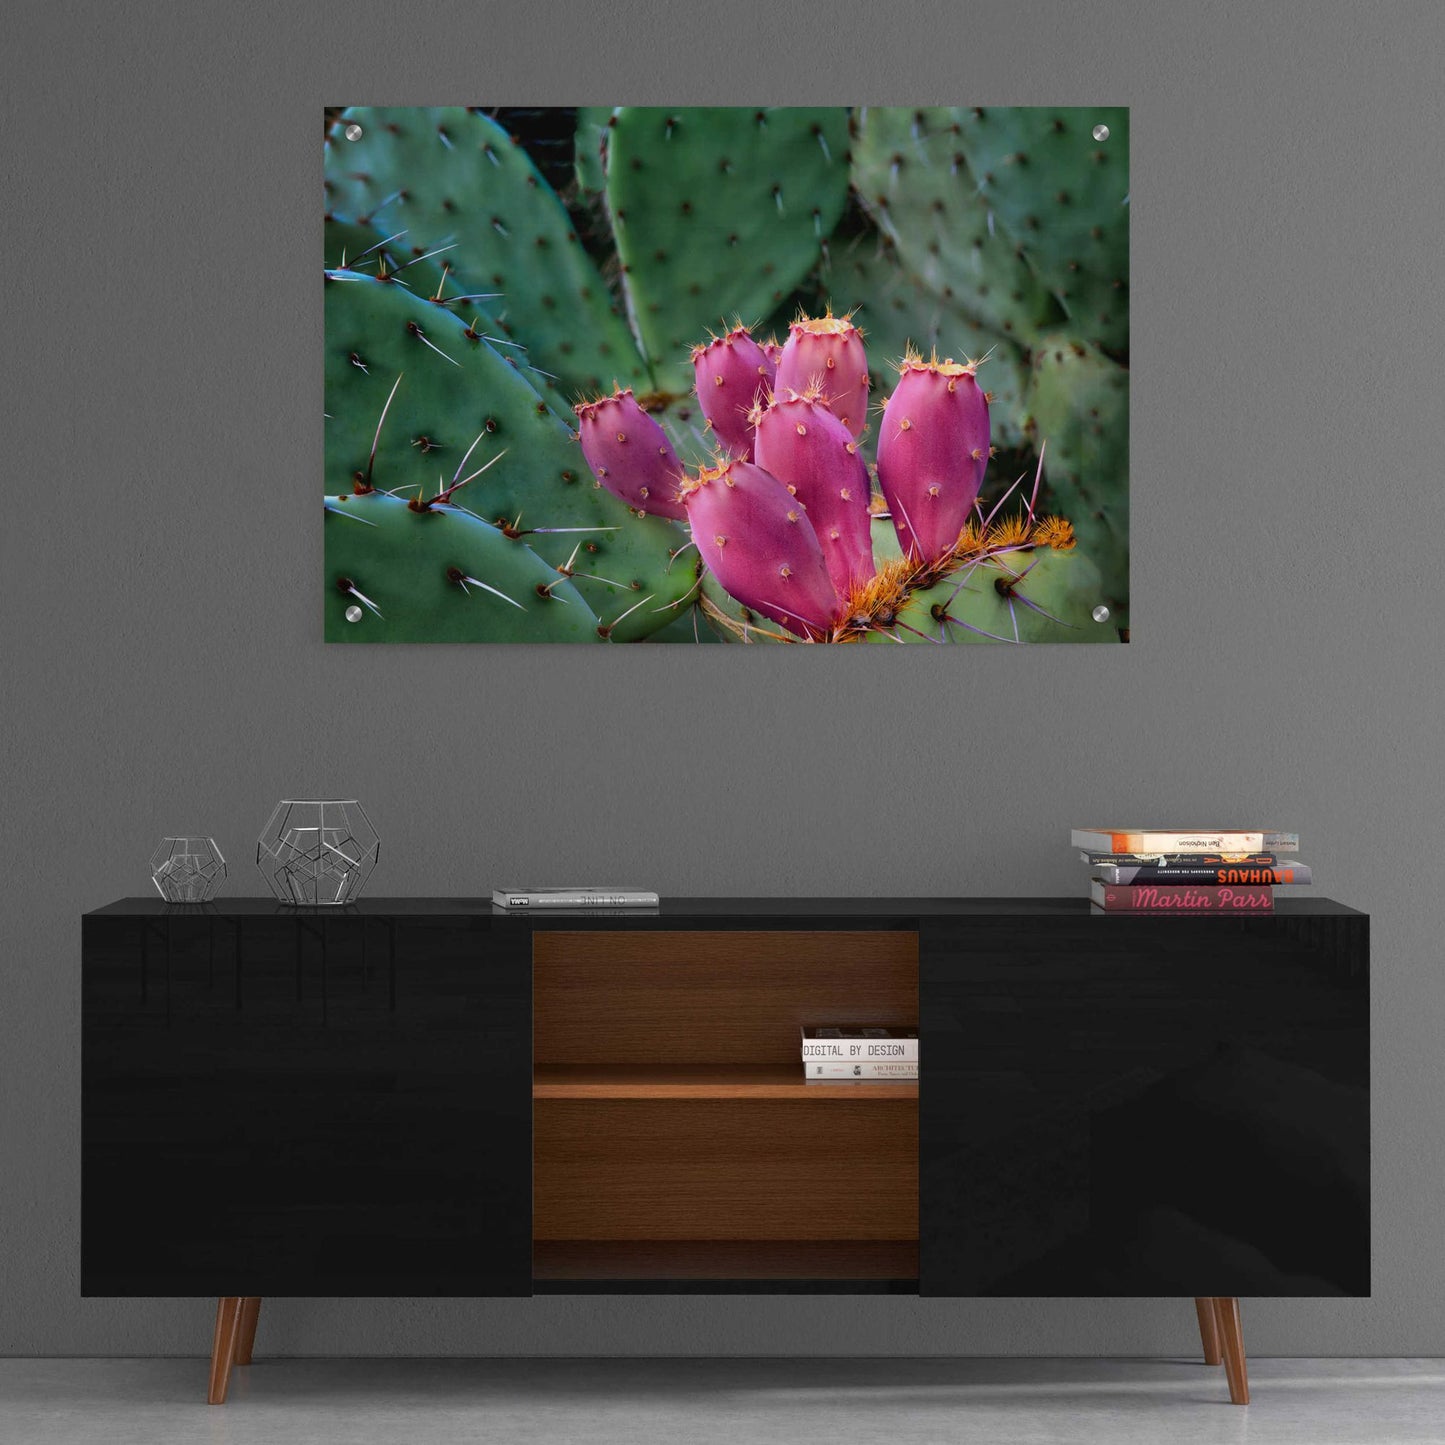 Epic Art 'Pink Cactus' by Dennis Frates, Acrylic Glass Wall Art,36x24